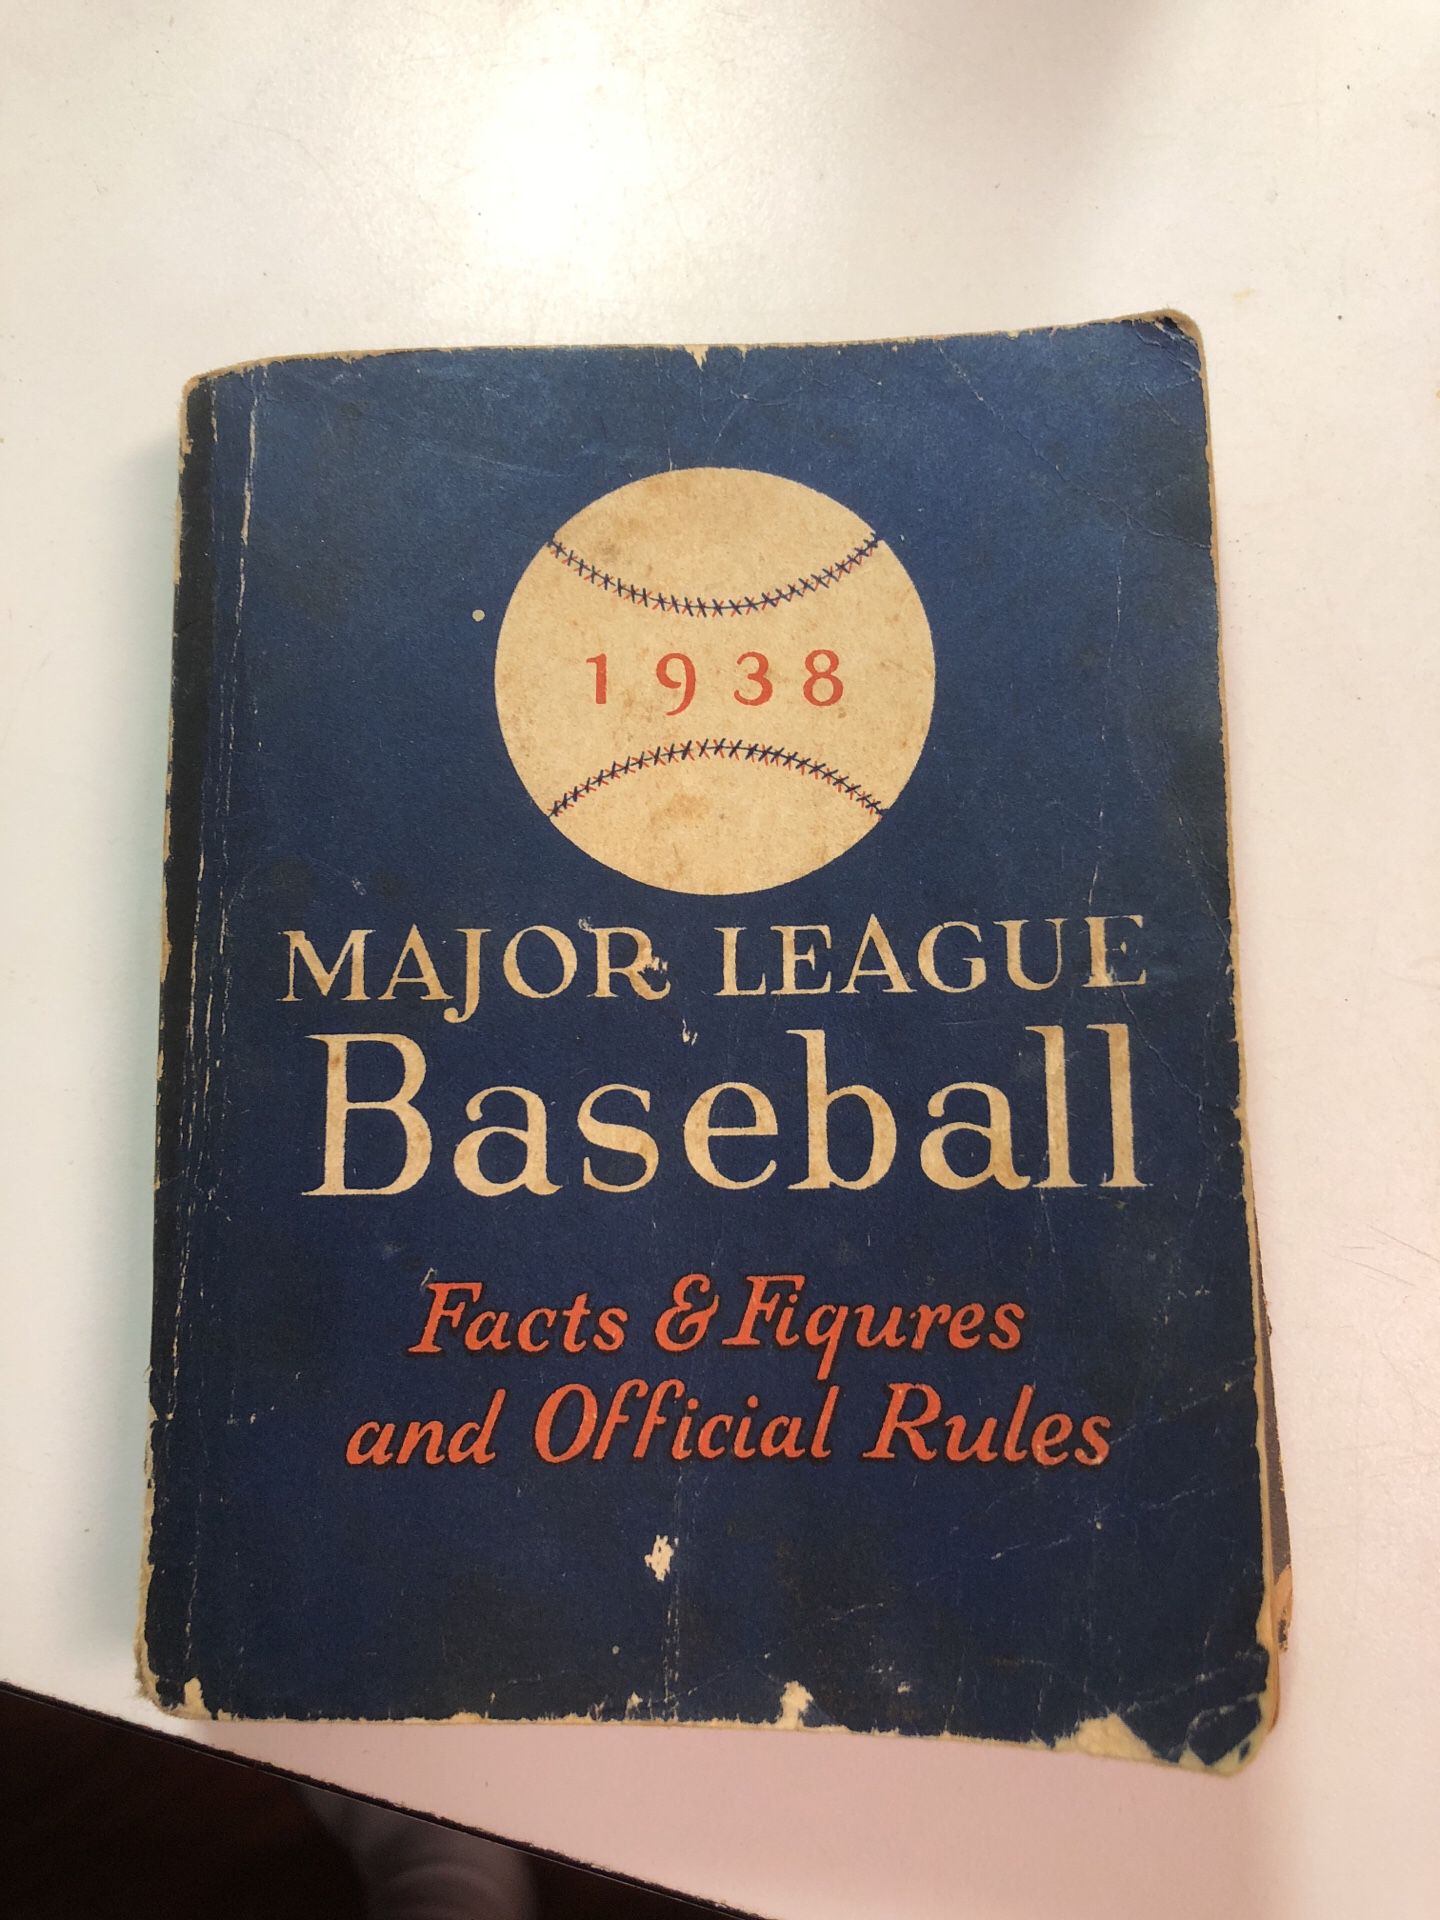 1938 Major League Baseball Facts, Figures, and Official Rules